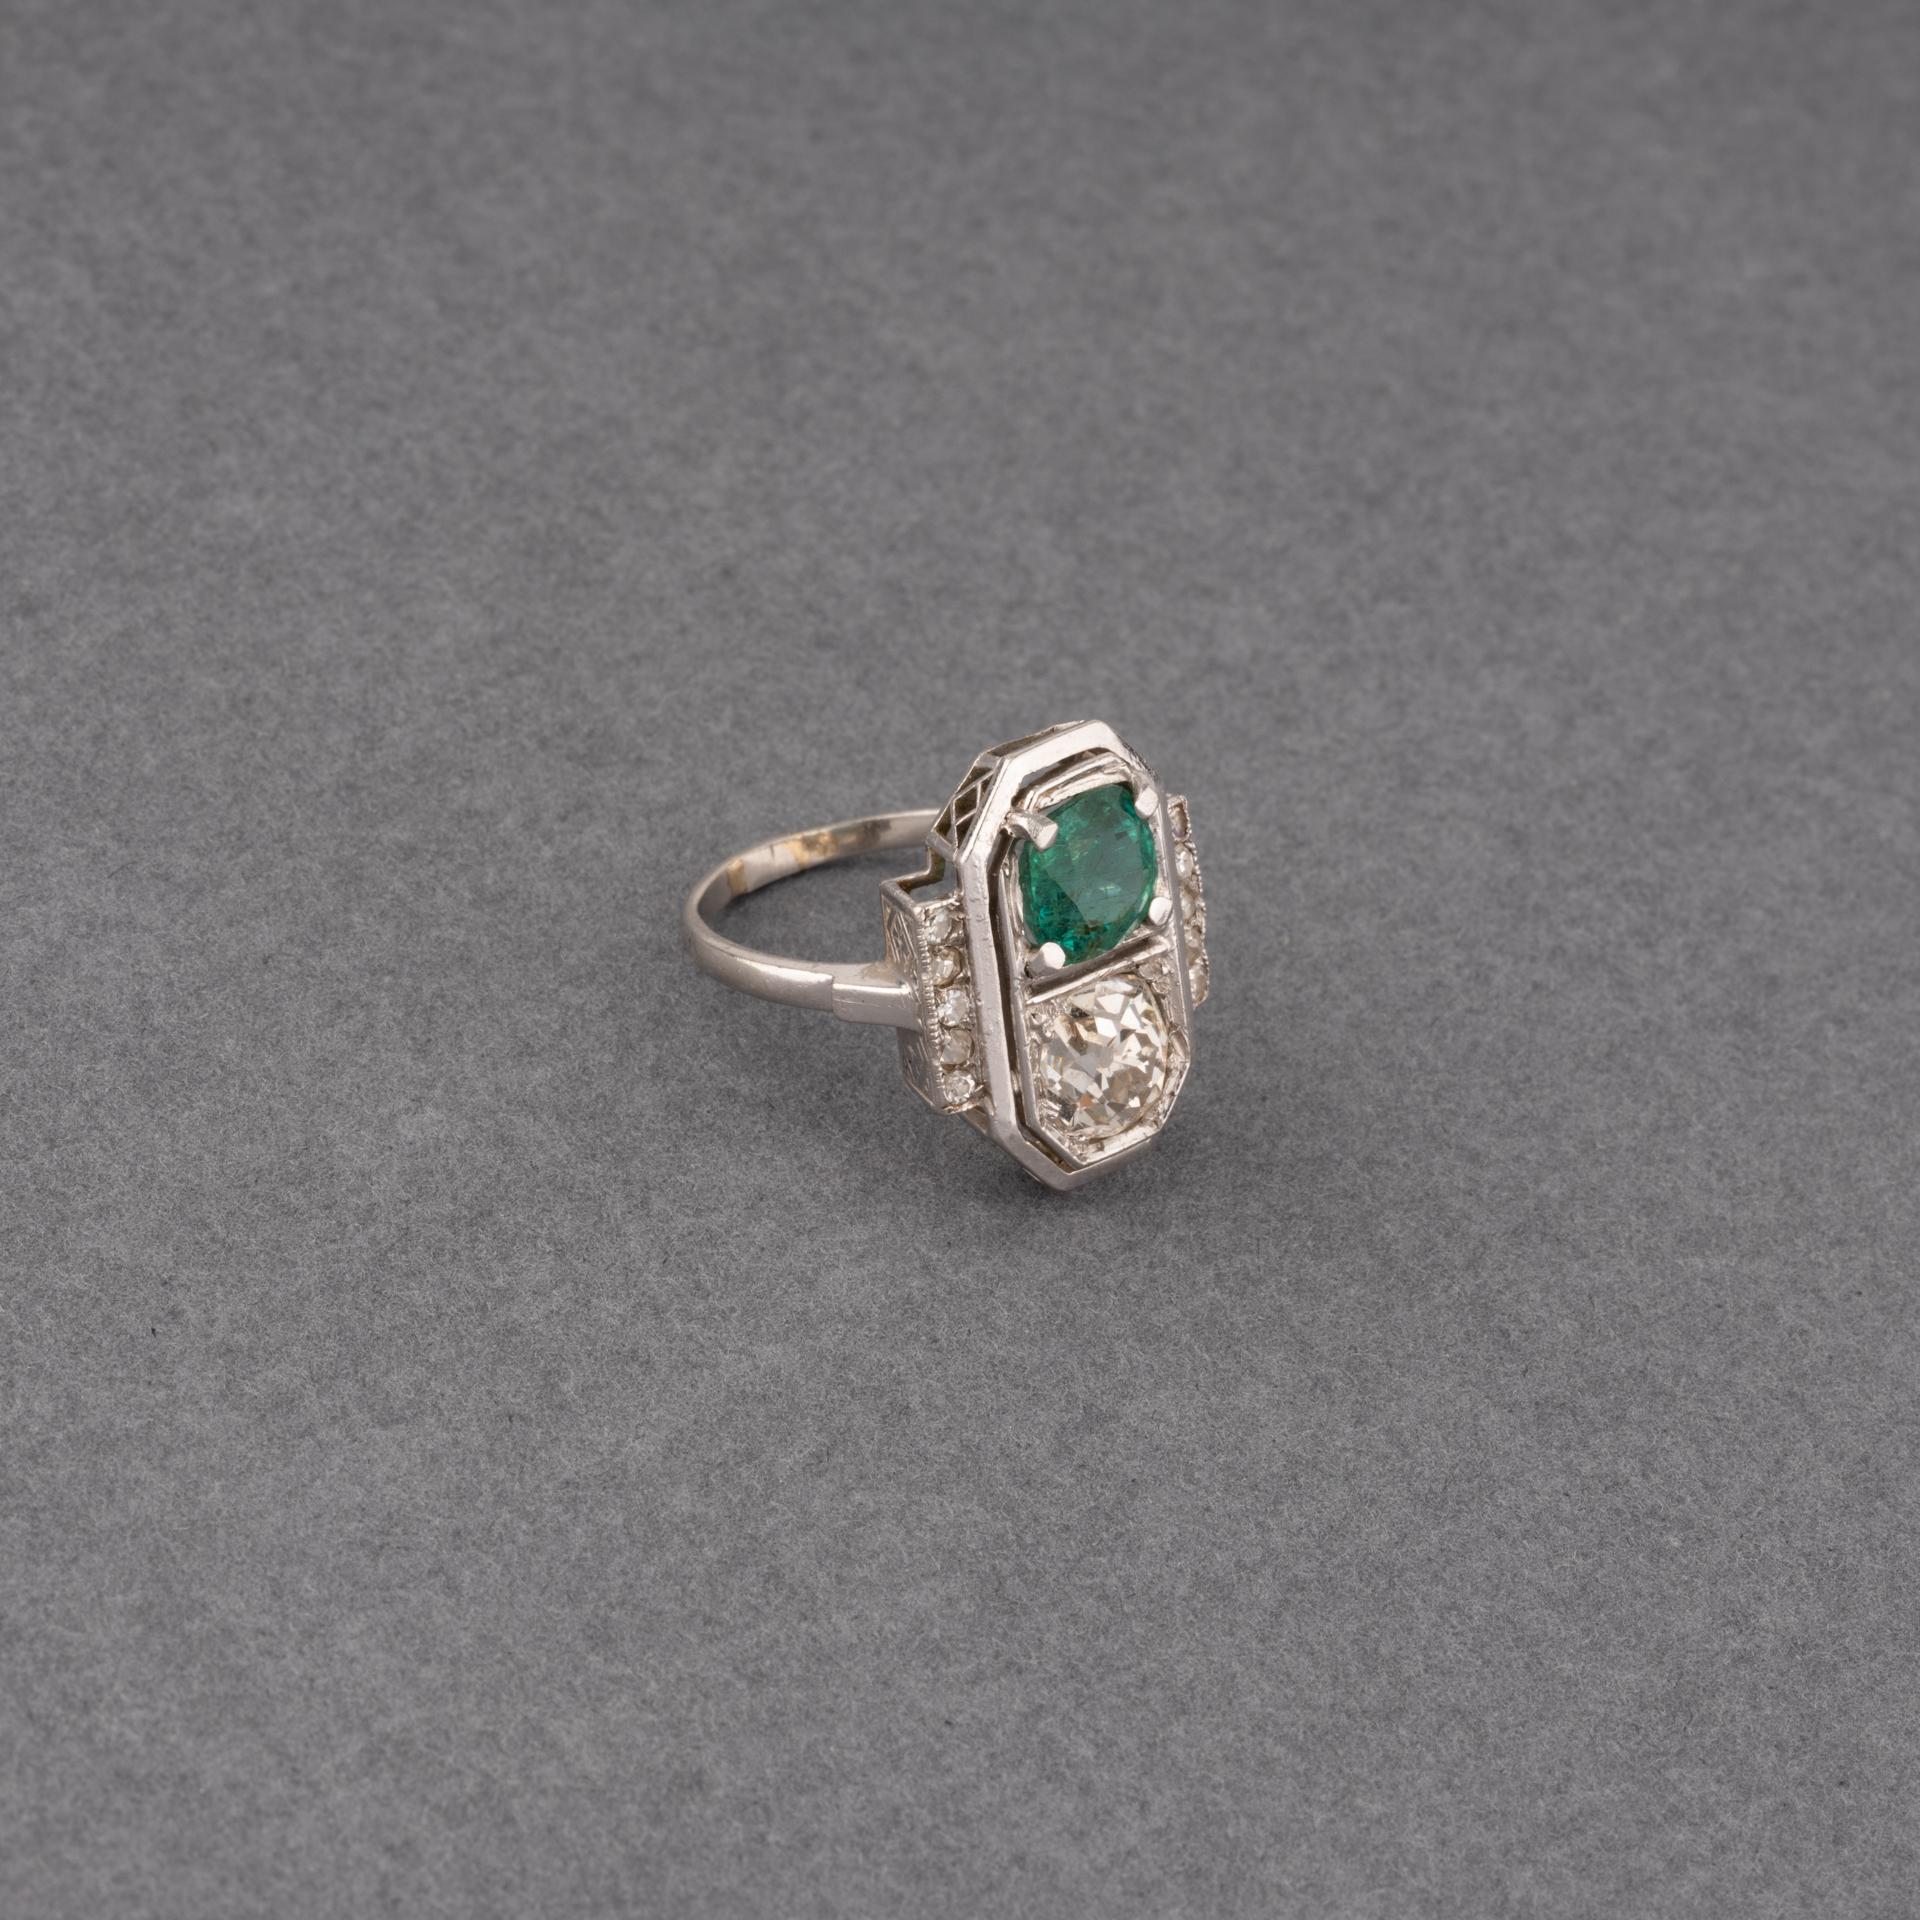 A very lovely French Art deco ring, made circa 1925.
Made and Platinum: dog head hallmark.
The ring is set with a quality diamond who weights approximately 0.90/1 carat. The emerald weights Approximately the same weight.
The craftmanship is very